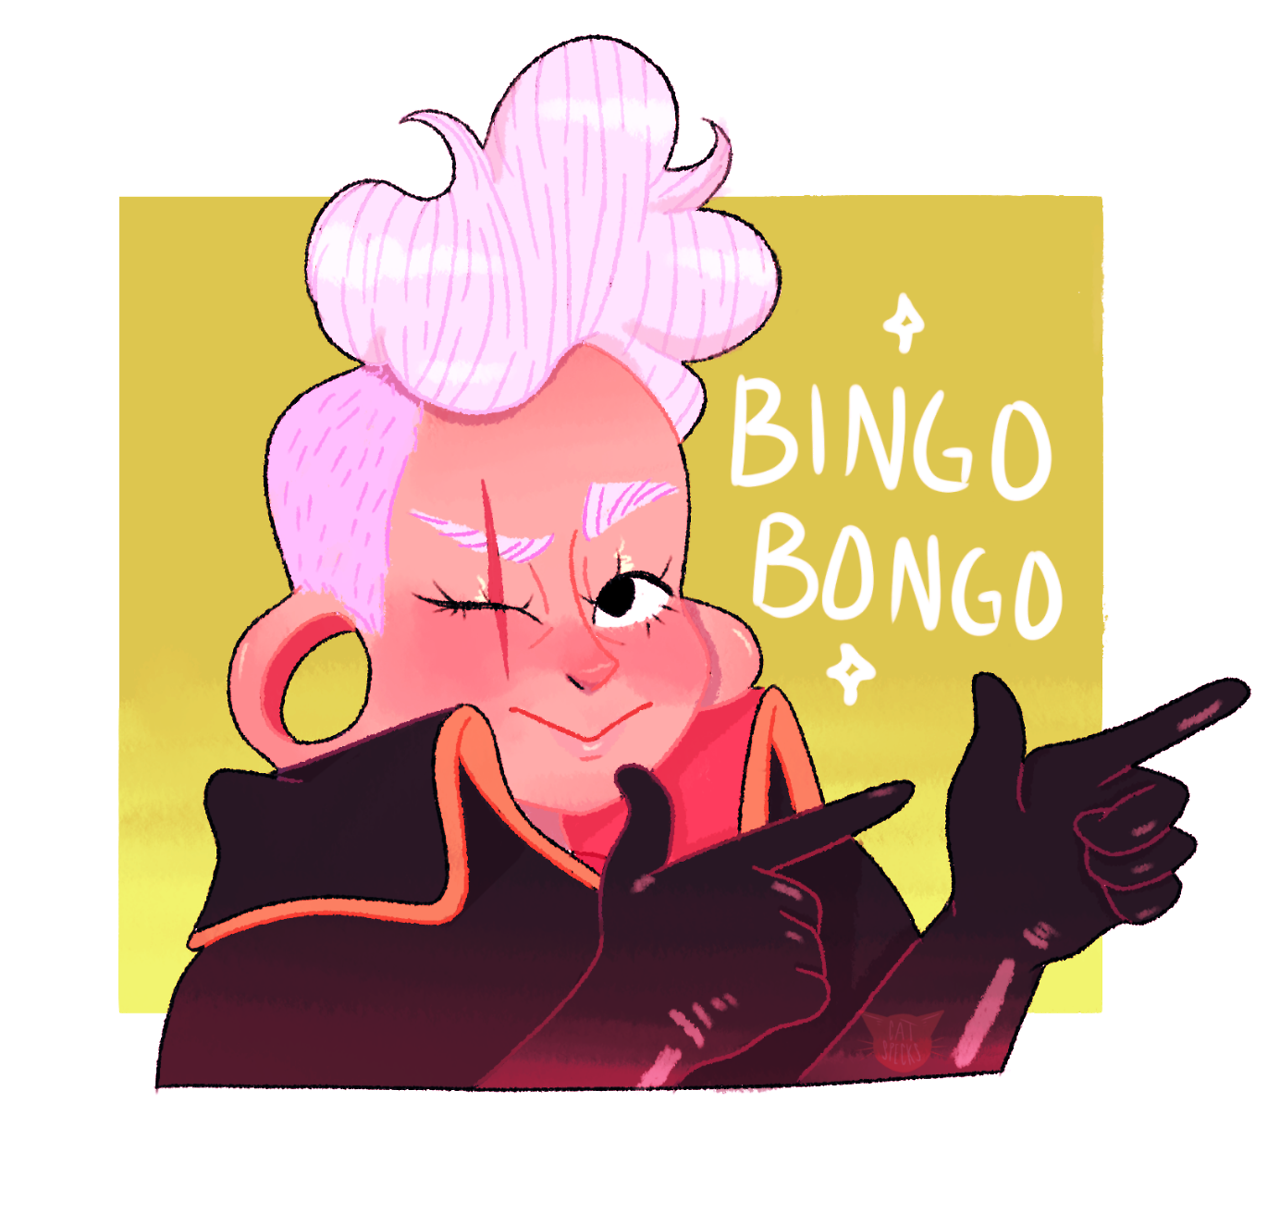 Bingo bongo, baby ✨ Don’t steal, remove tag, or repost without credit ✨